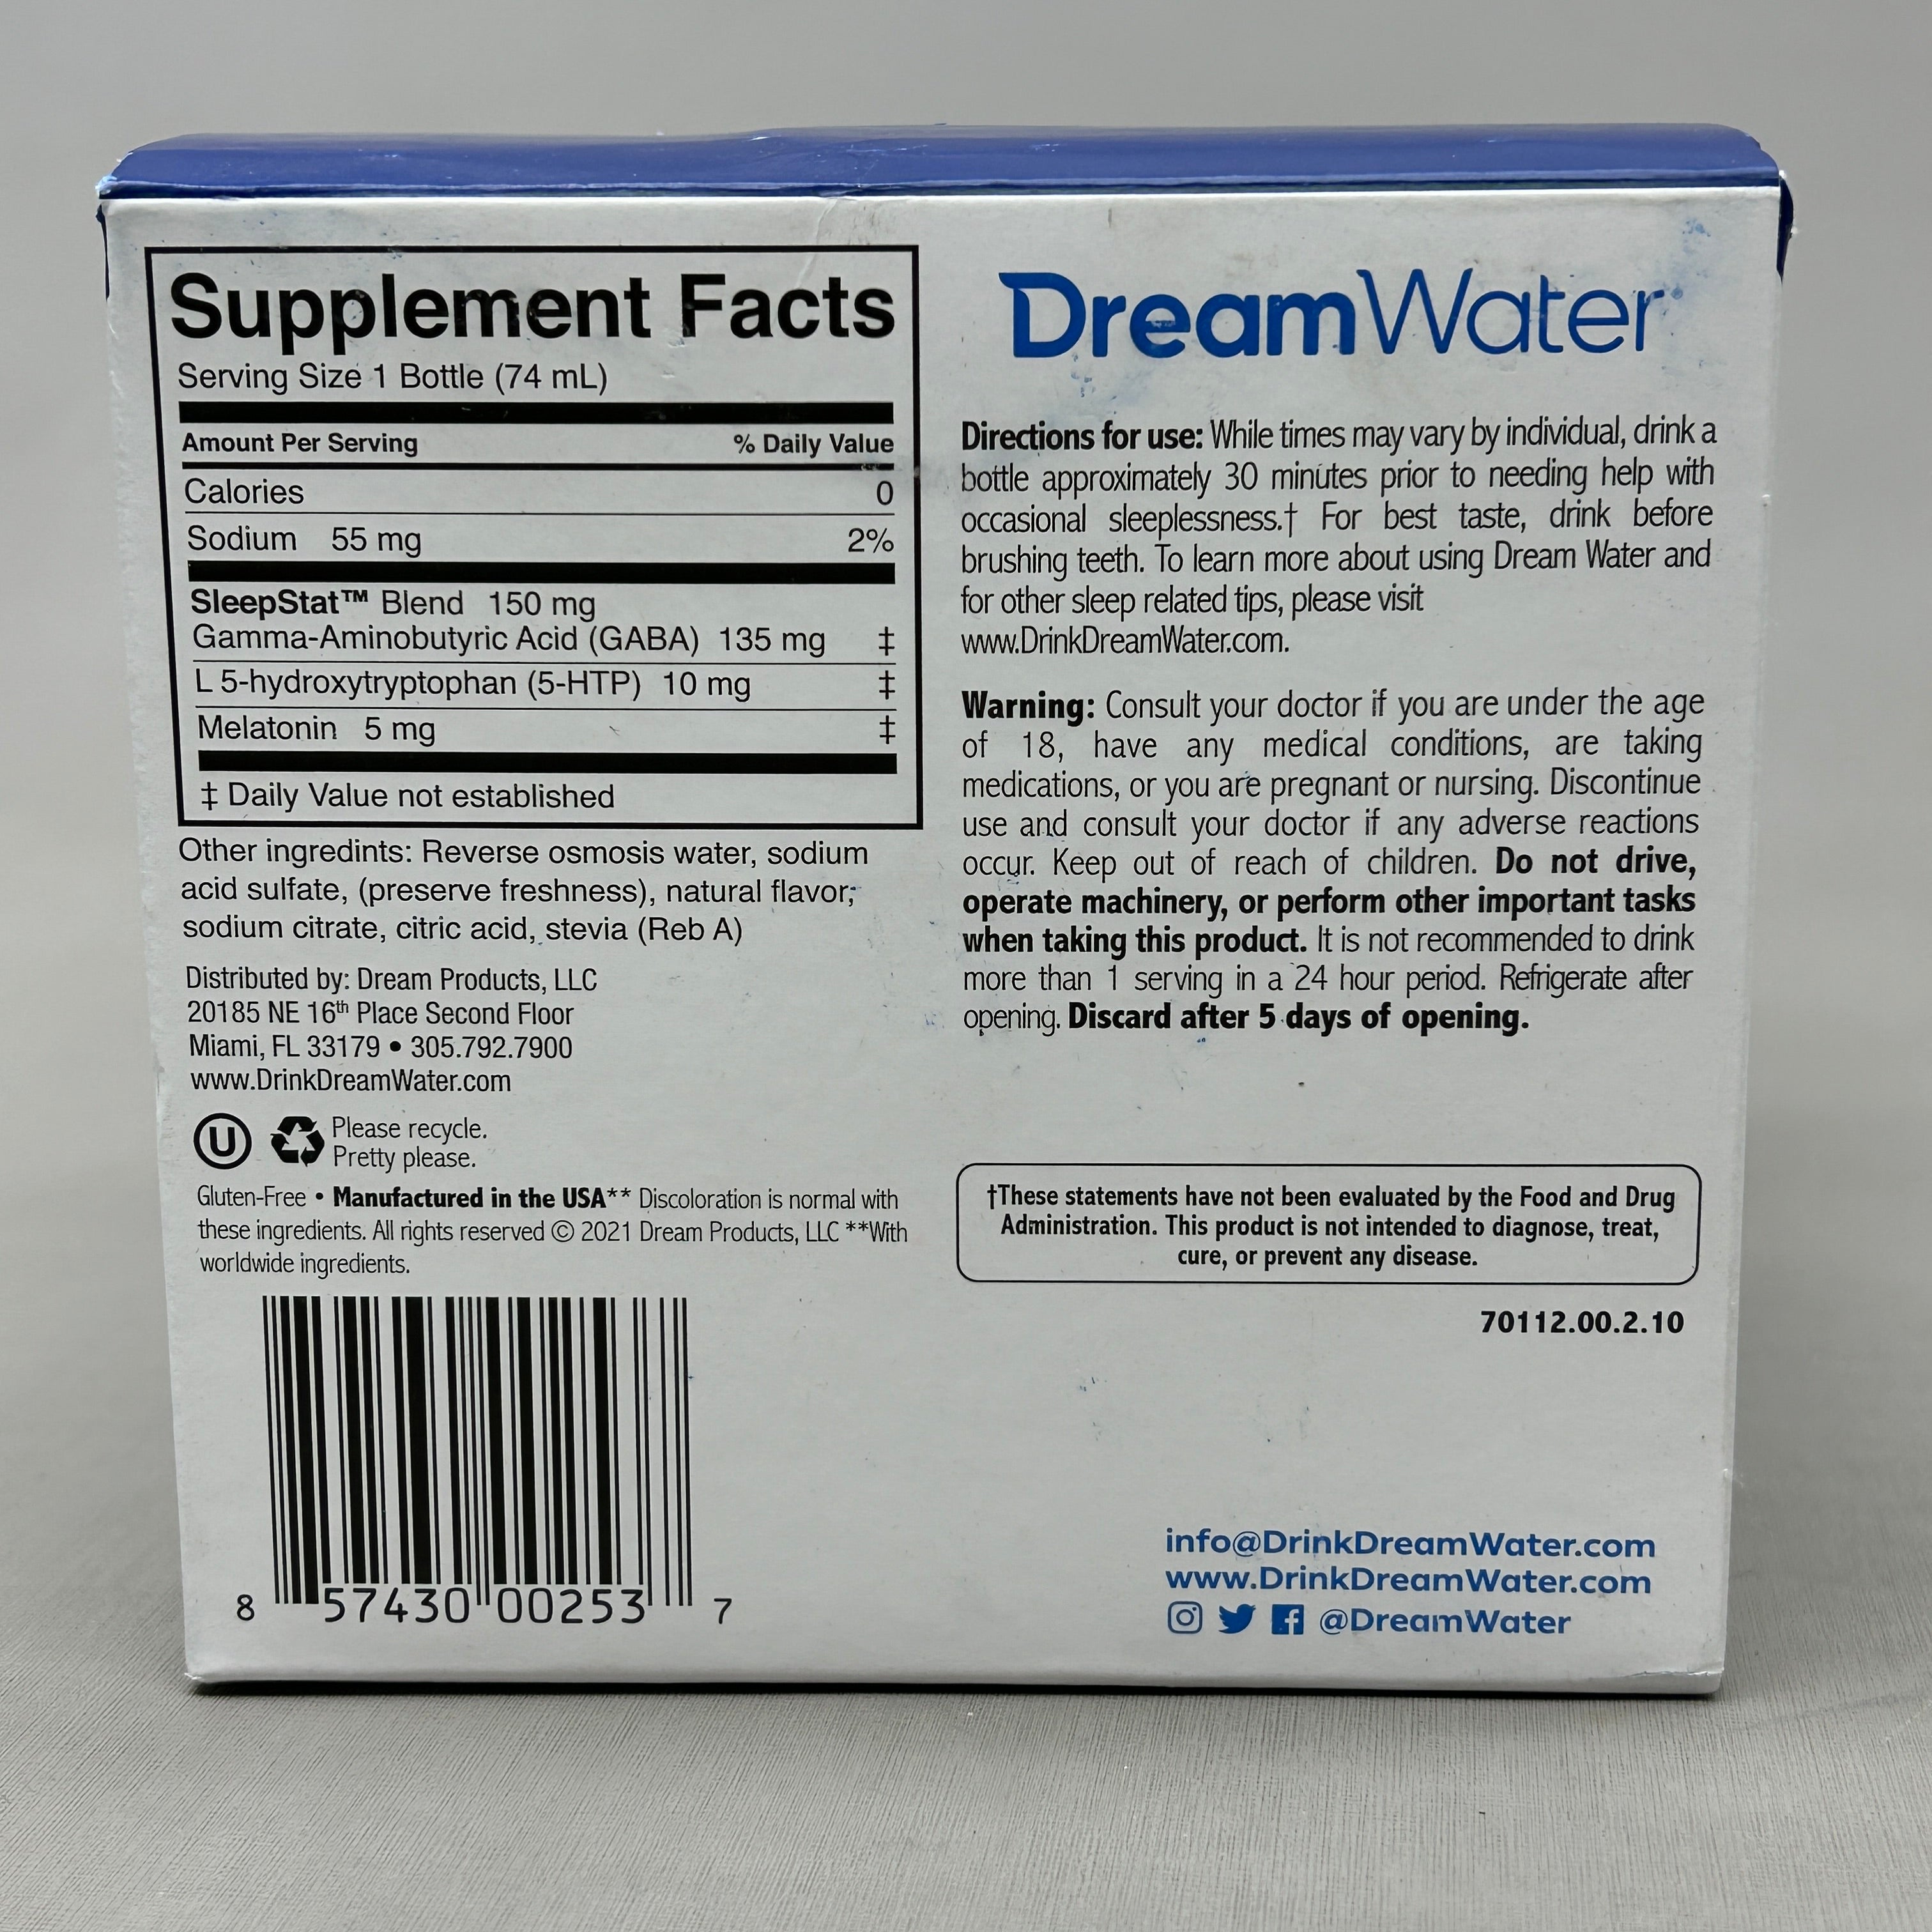 z@ DREAM WATER 12-PACK! Sleep and Relaxation Shot Snoozeberry 2.5 fl oz BB 09/23 (New) J